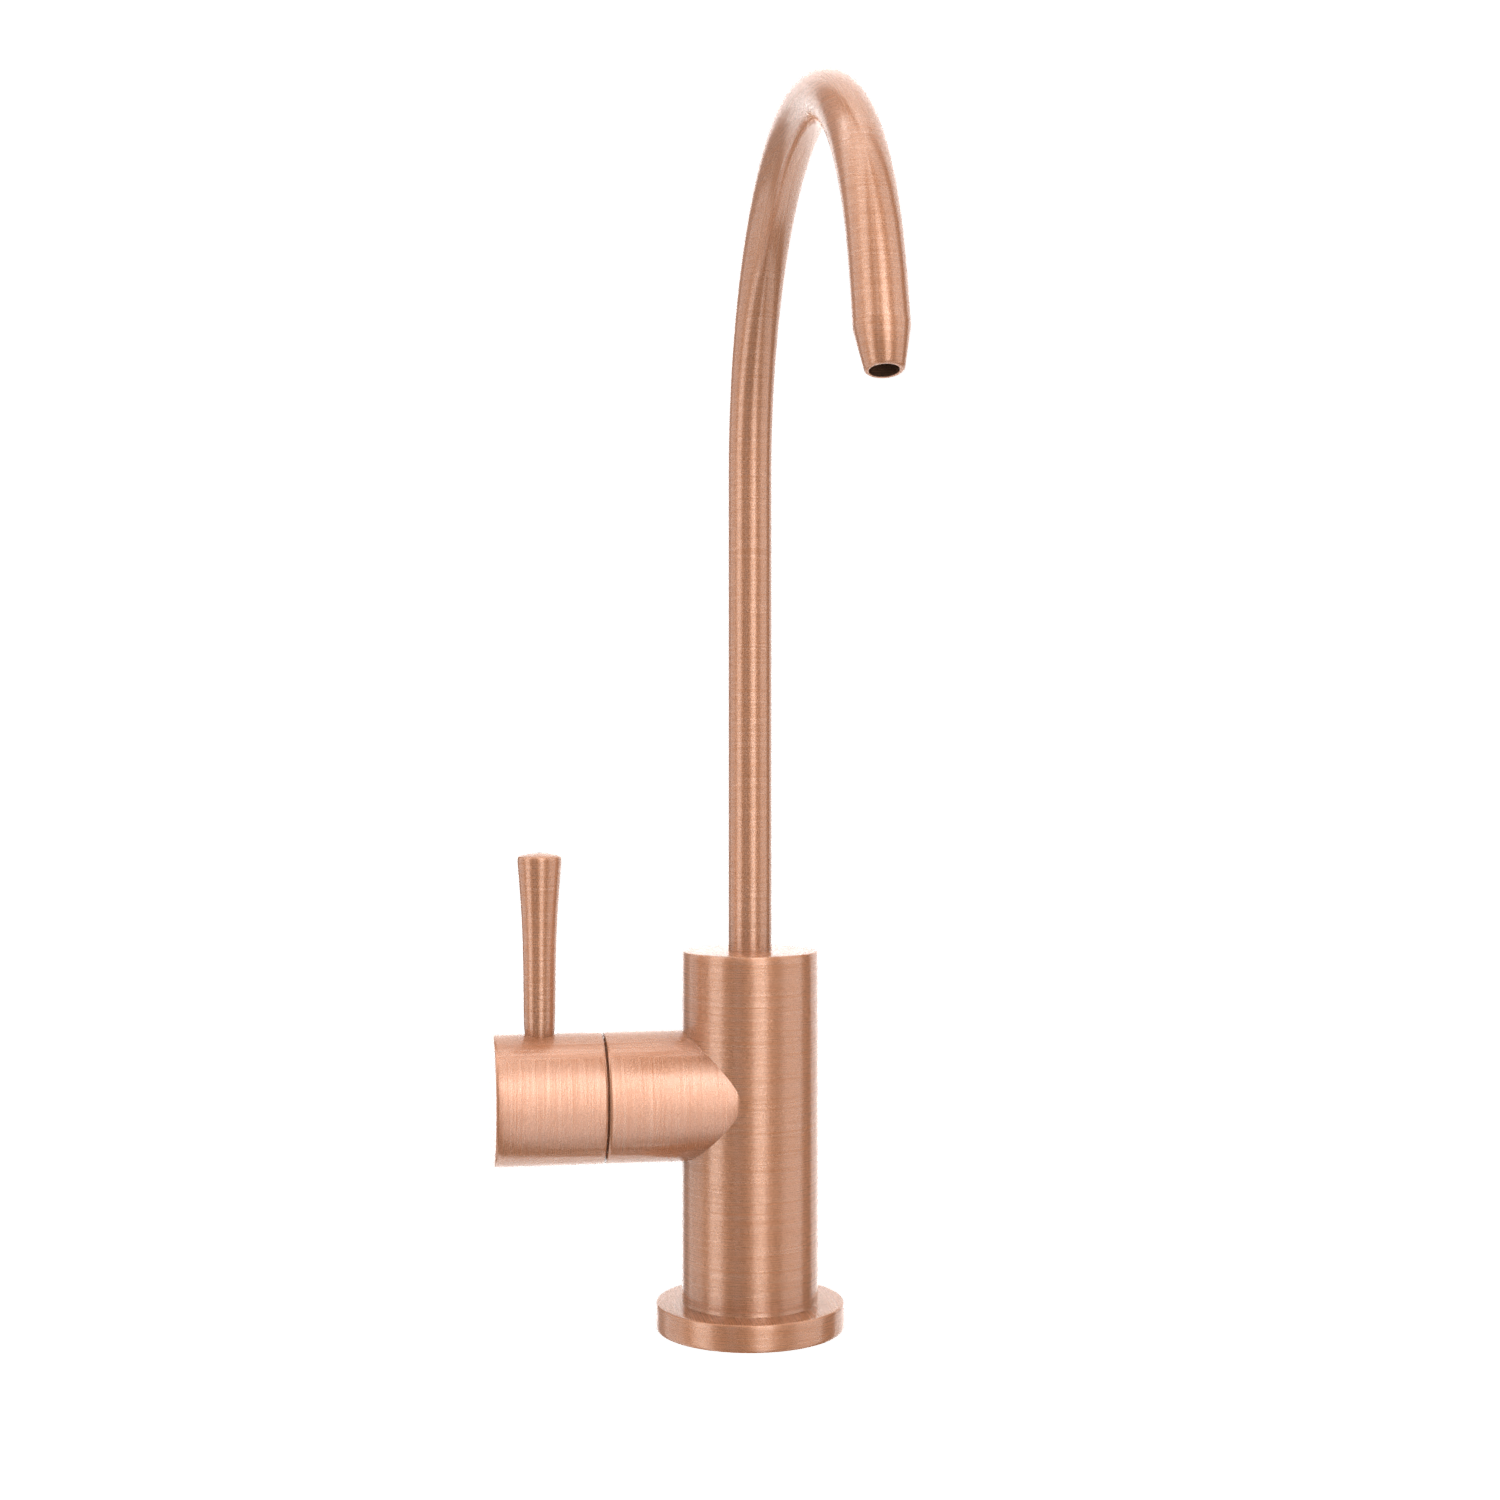 One-Handle Copper Drinking Water Filter Faucet Water Purifier Faucet - AK97703C